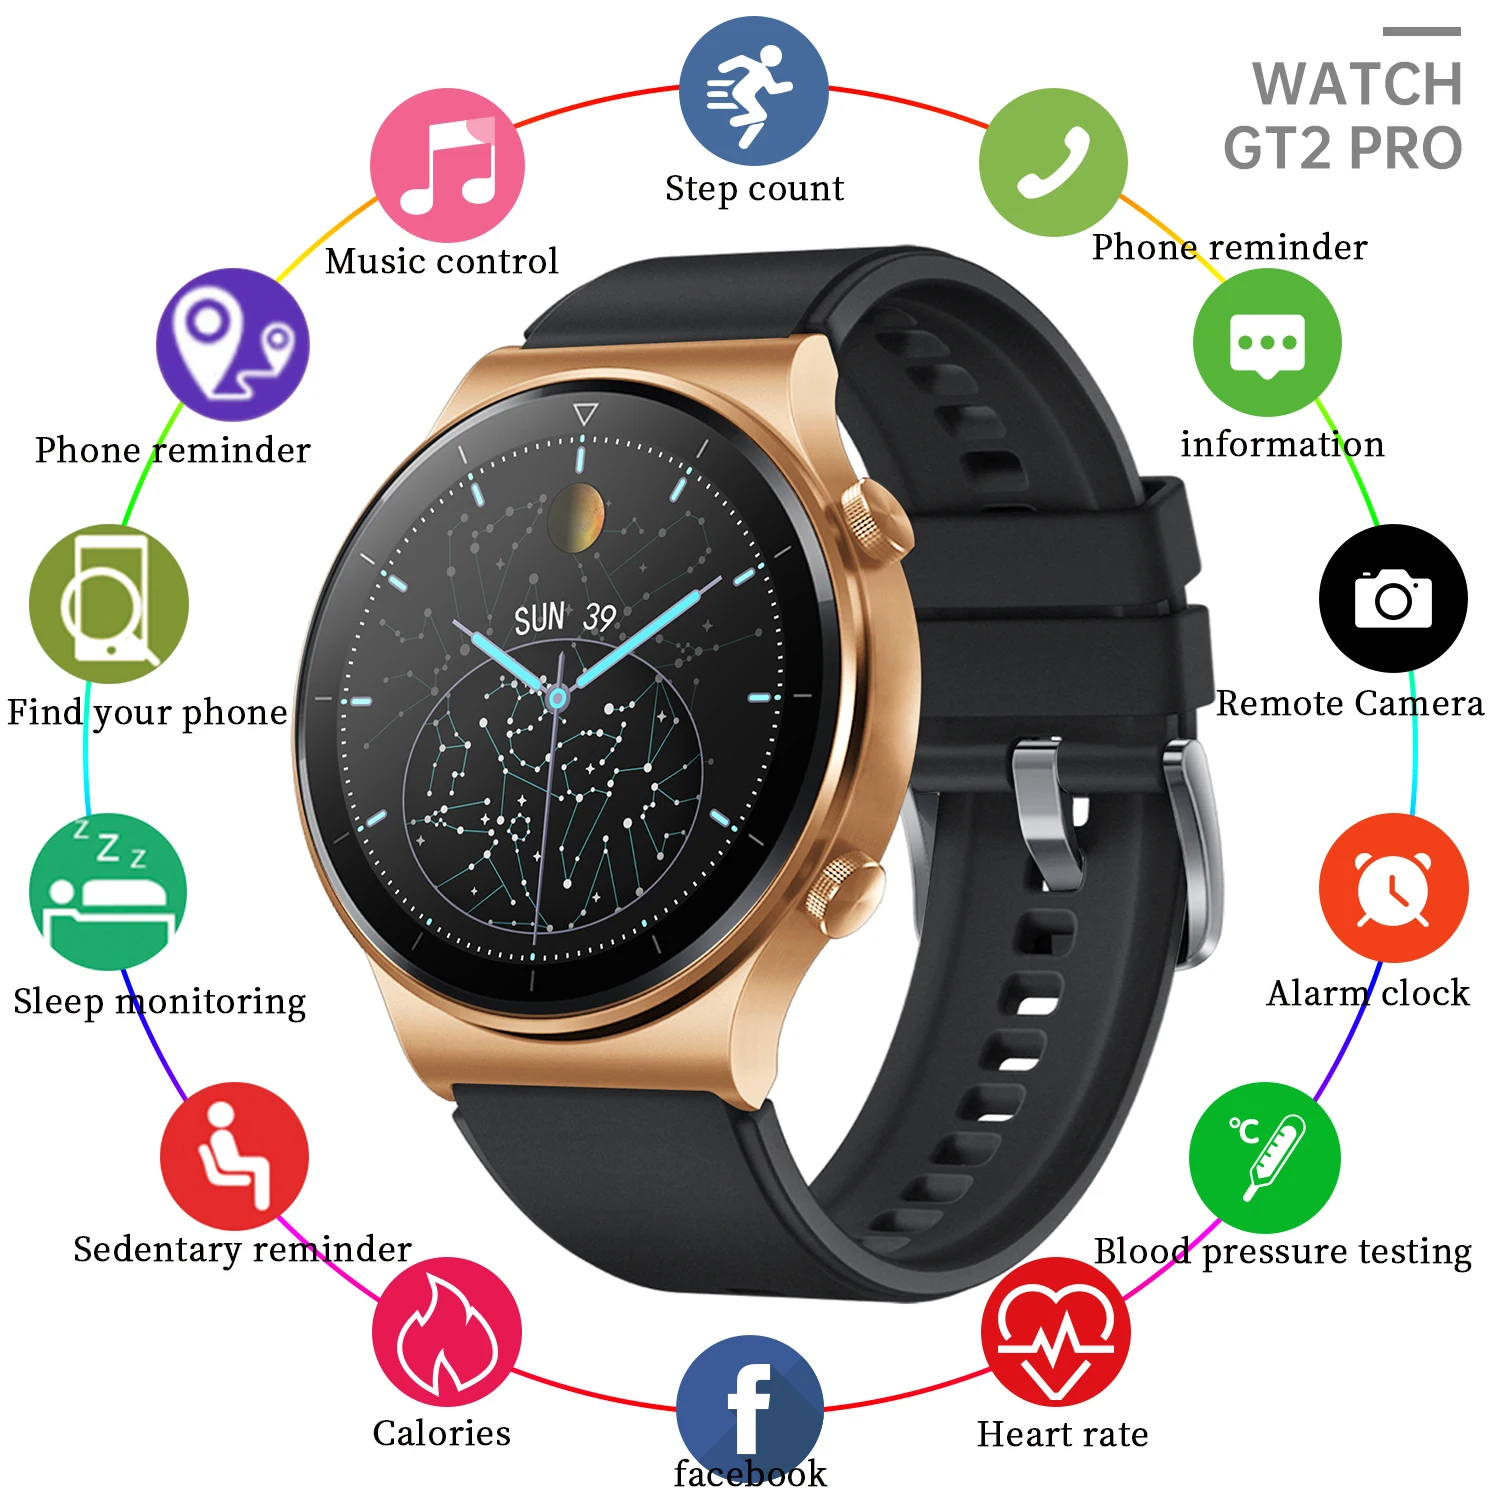 2021 new full touch smart watch gt2 pro running sports watch suitable for samsung huawei apple xiaomi amazfit smart watch free global shipping